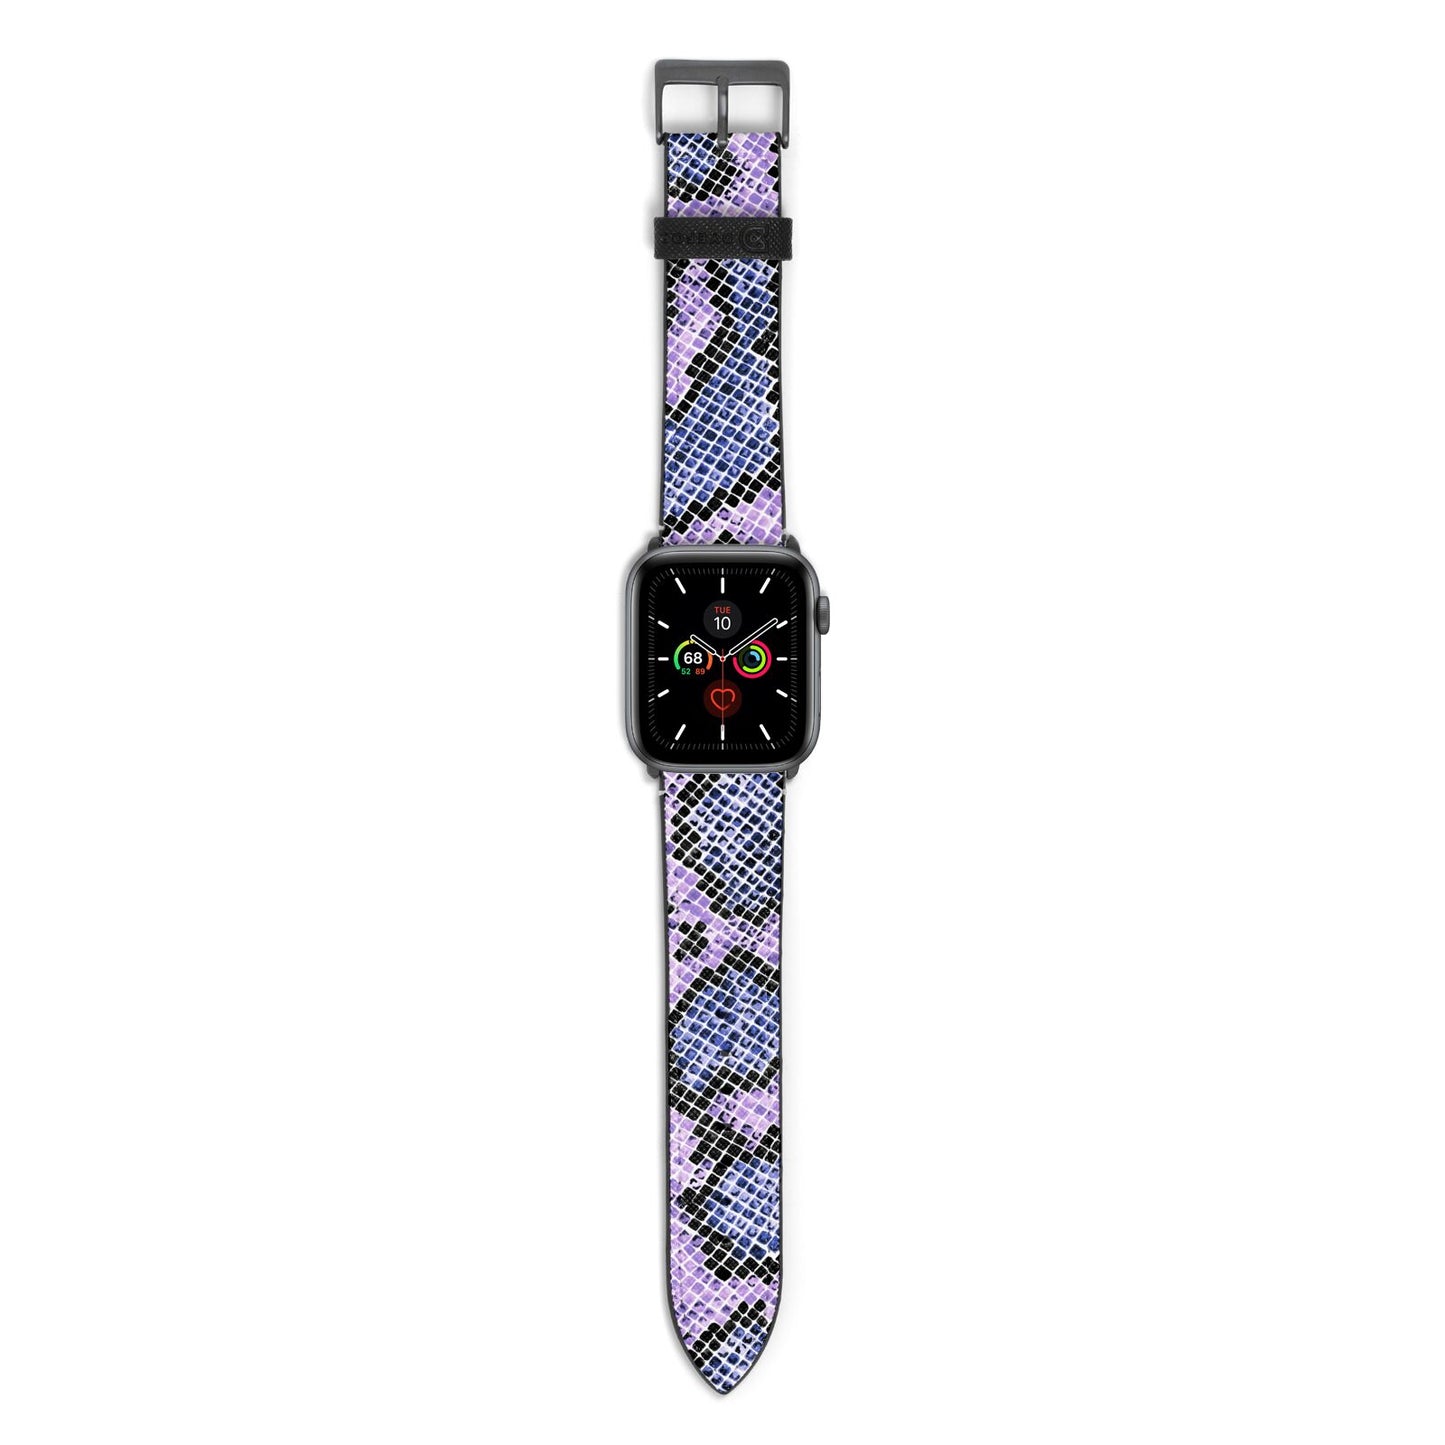 Purple And Blue Snakeskin Apple Watch Strap with Space Grey Hardware